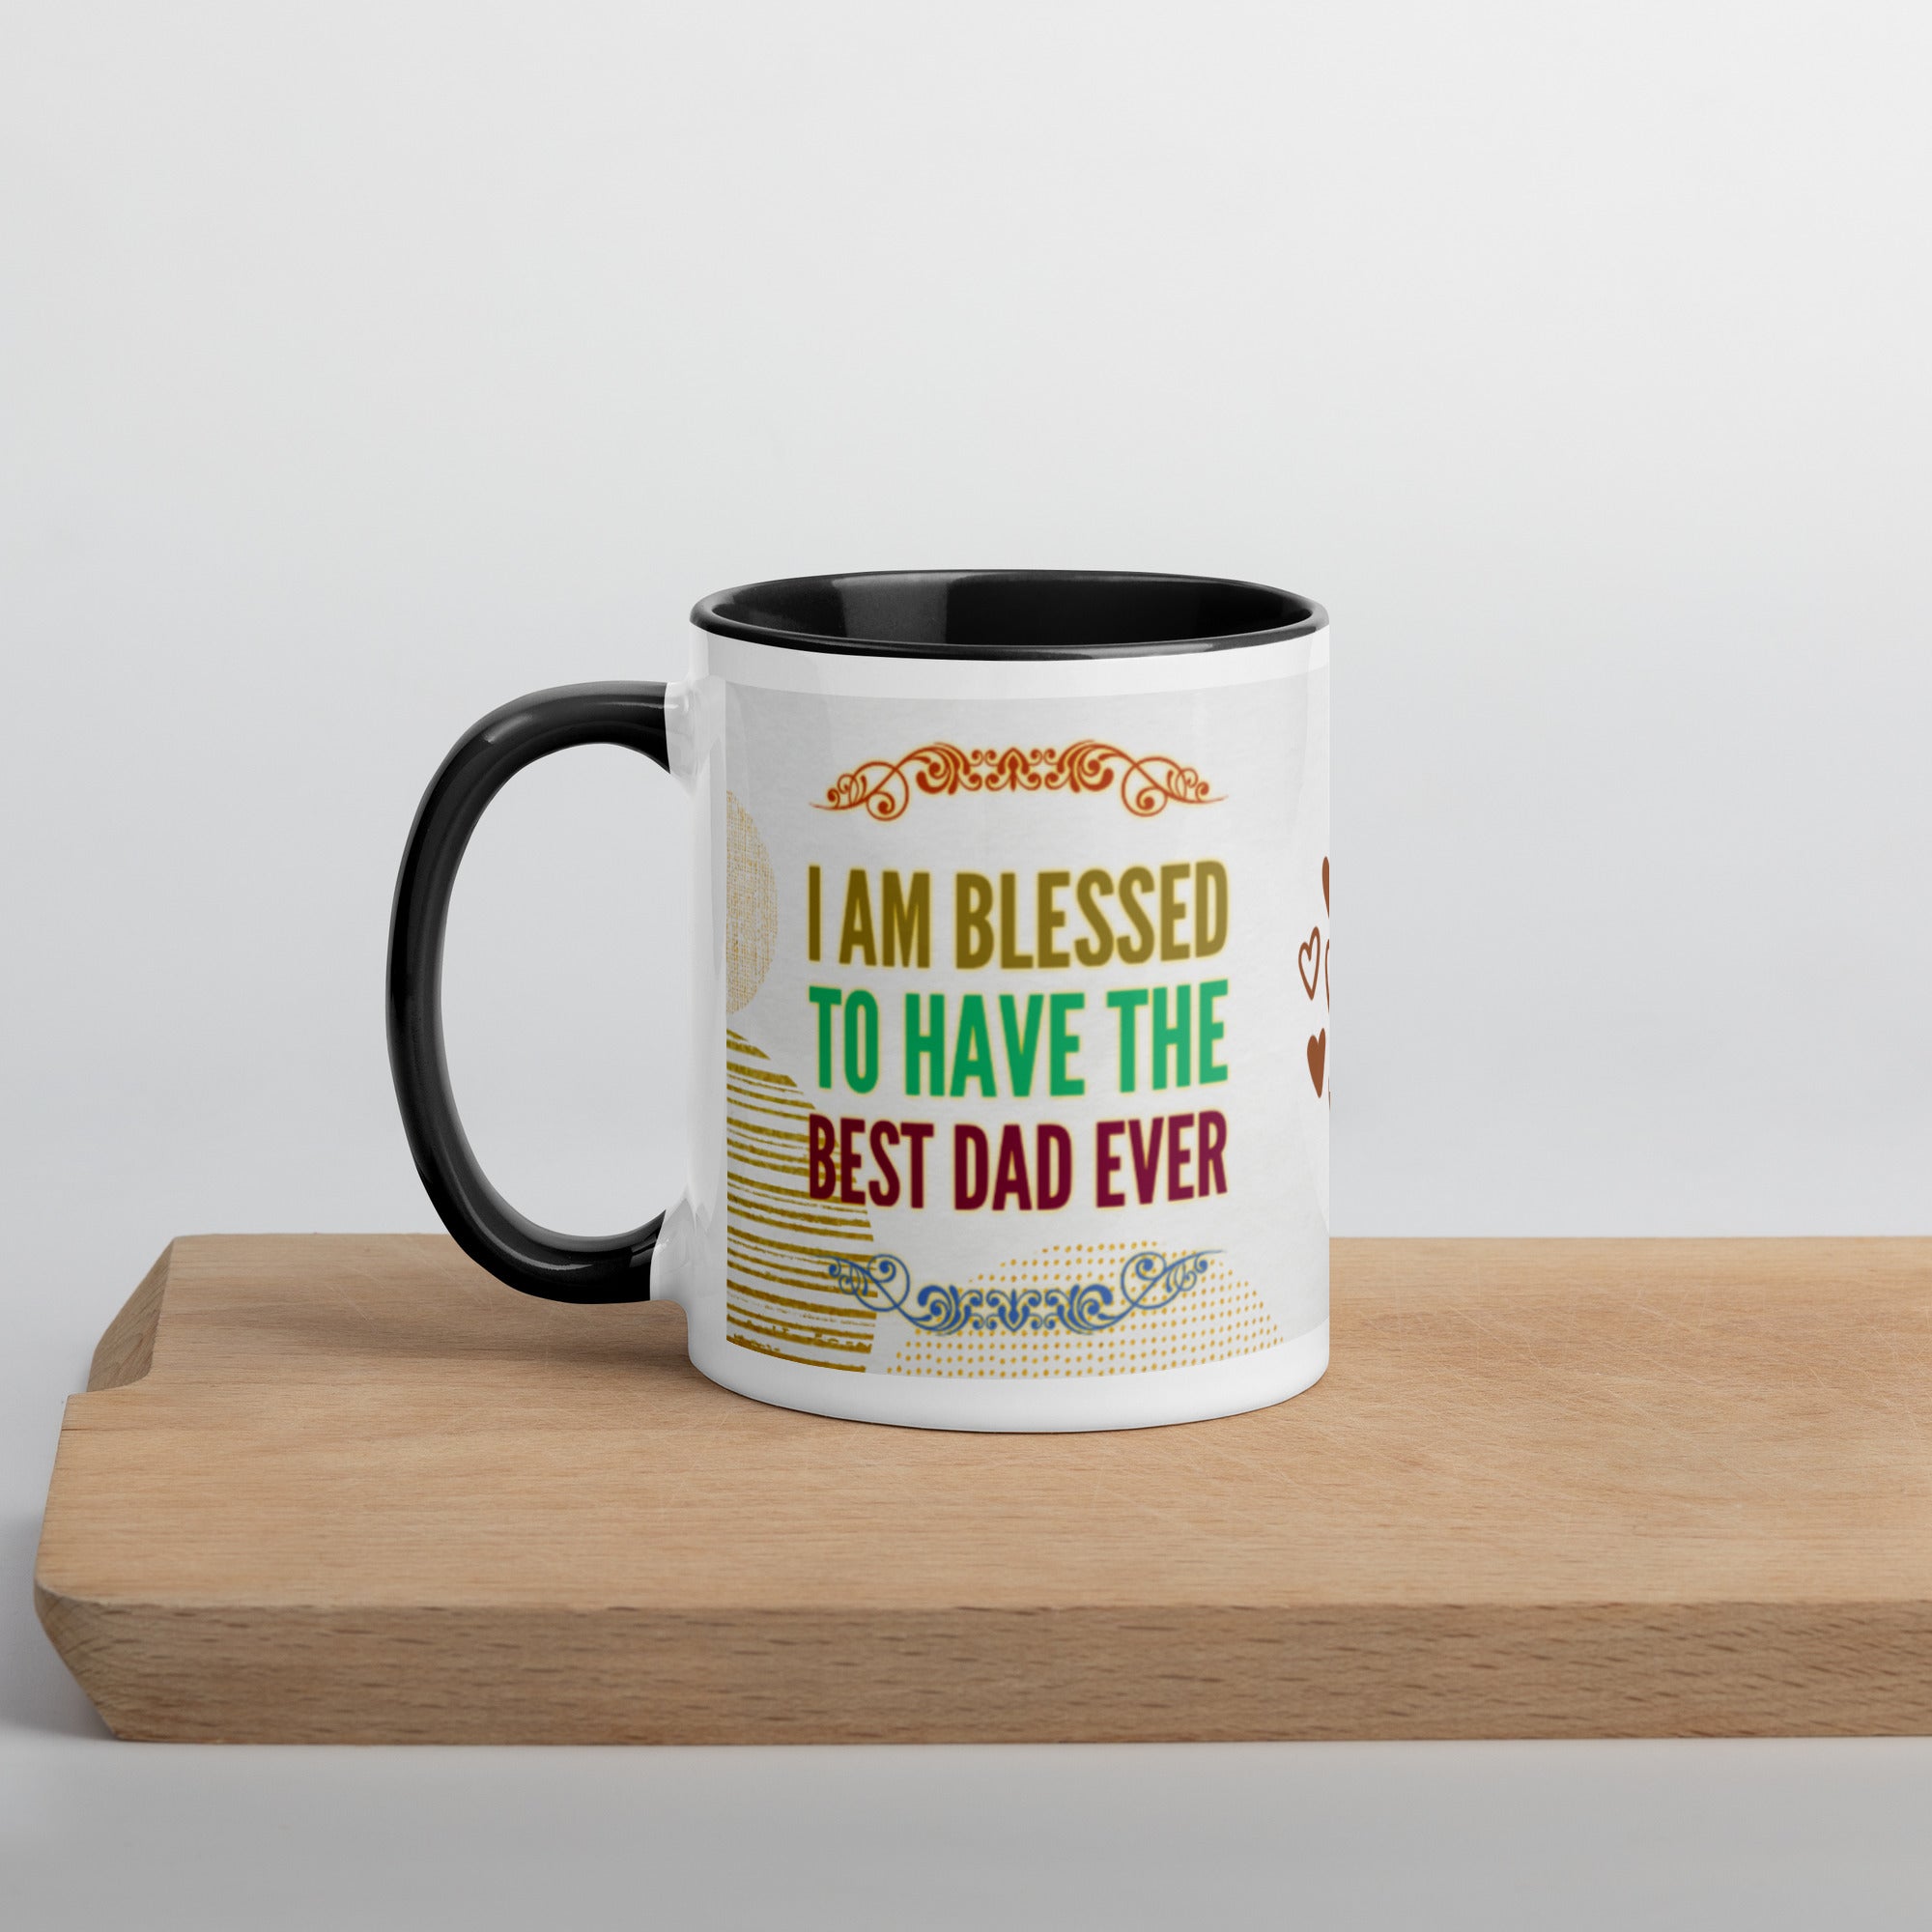 GloWell Designs - Mug with Color Inside - Affirmation Quote - Gift - Best Dad Ever - GloWell Designs